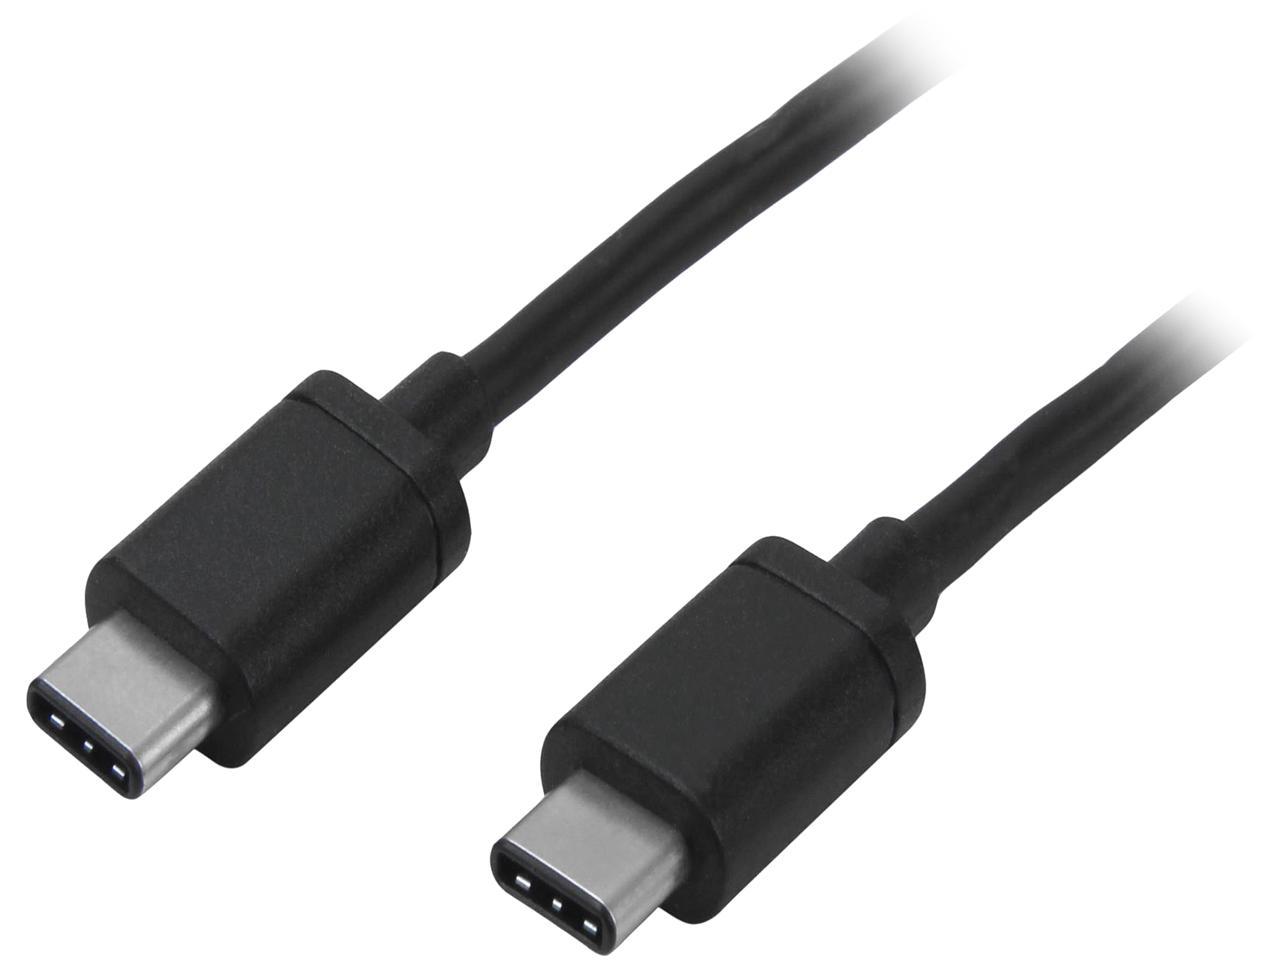 StarTech.com USB2CC2M 2m 6 ft USB C Cable - M/M - USB 2.0 - USB-IF Certified - USB-C Charging Cable - USB 2.0 Type C Cable